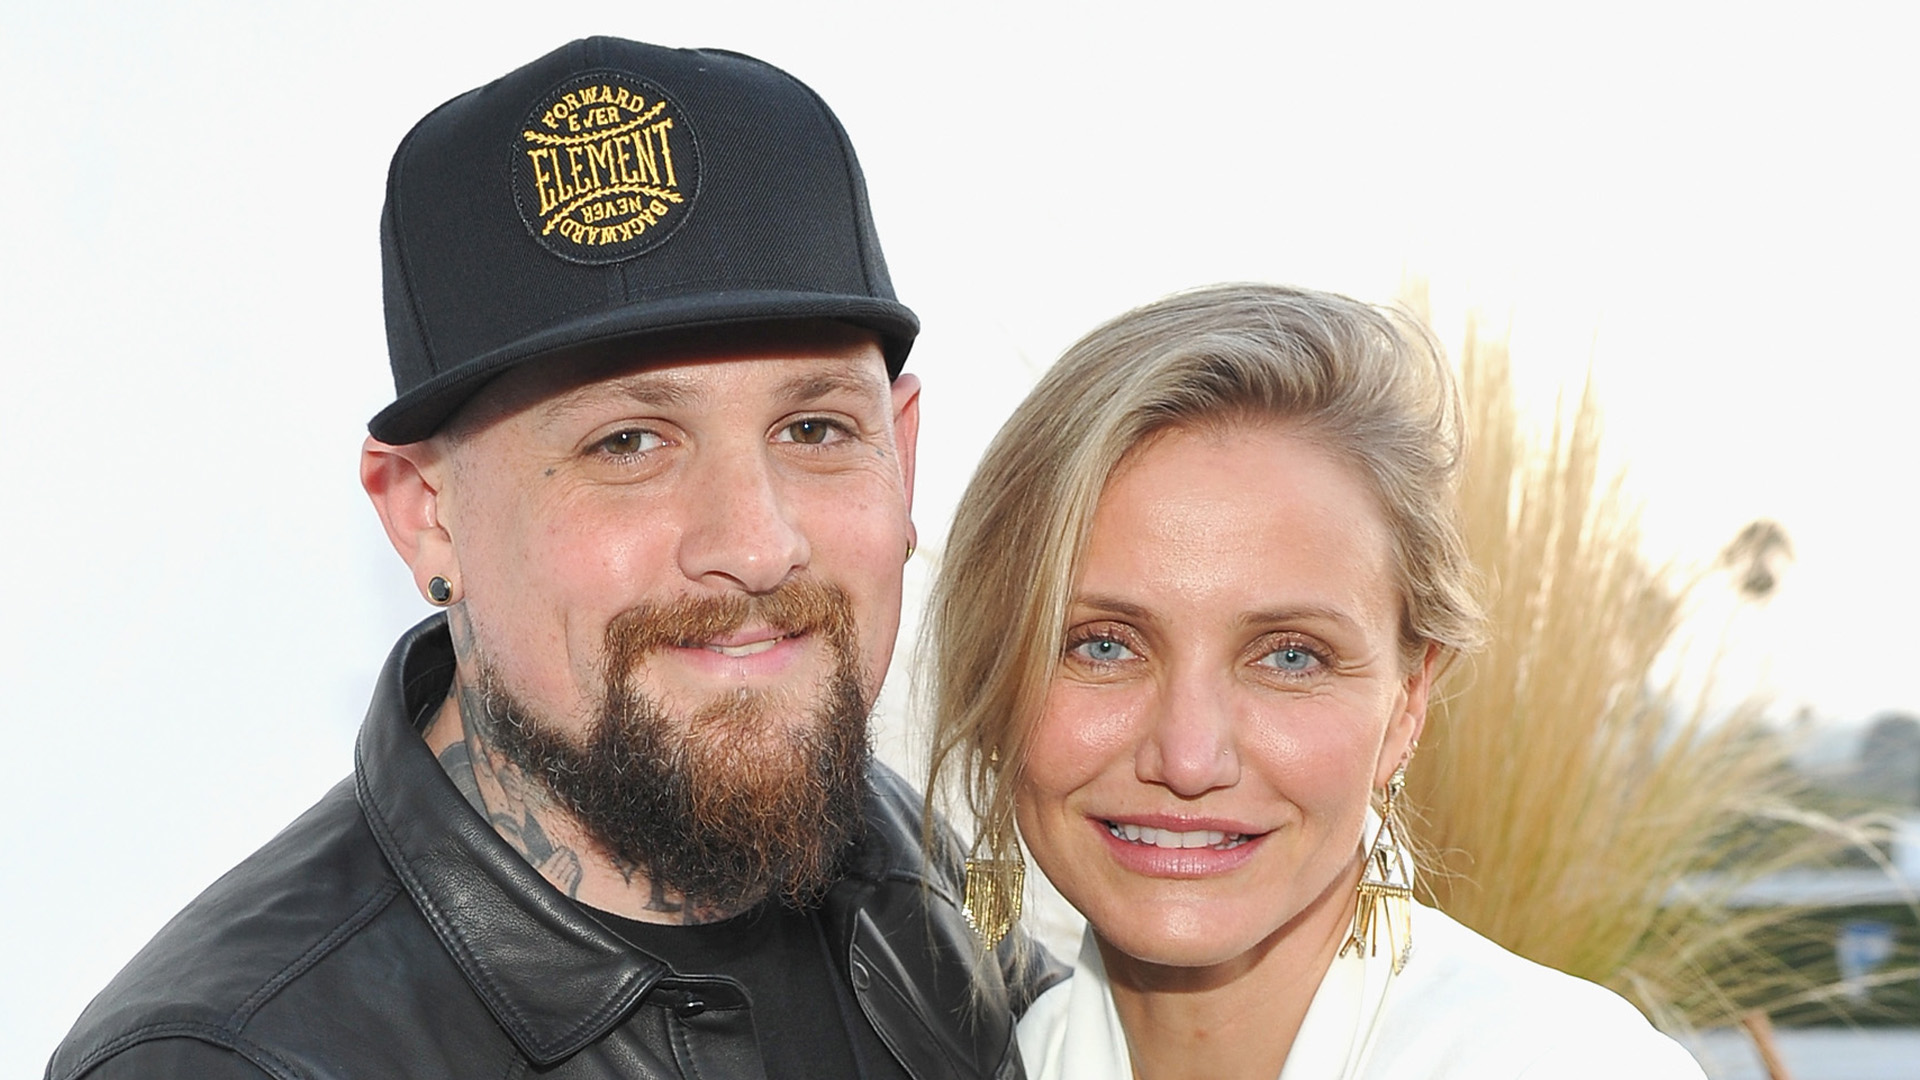 Cameron Diaz and Benji Madden’s Baby Boy: Introducing Their Unique Name in Sweet Photo Reveal!